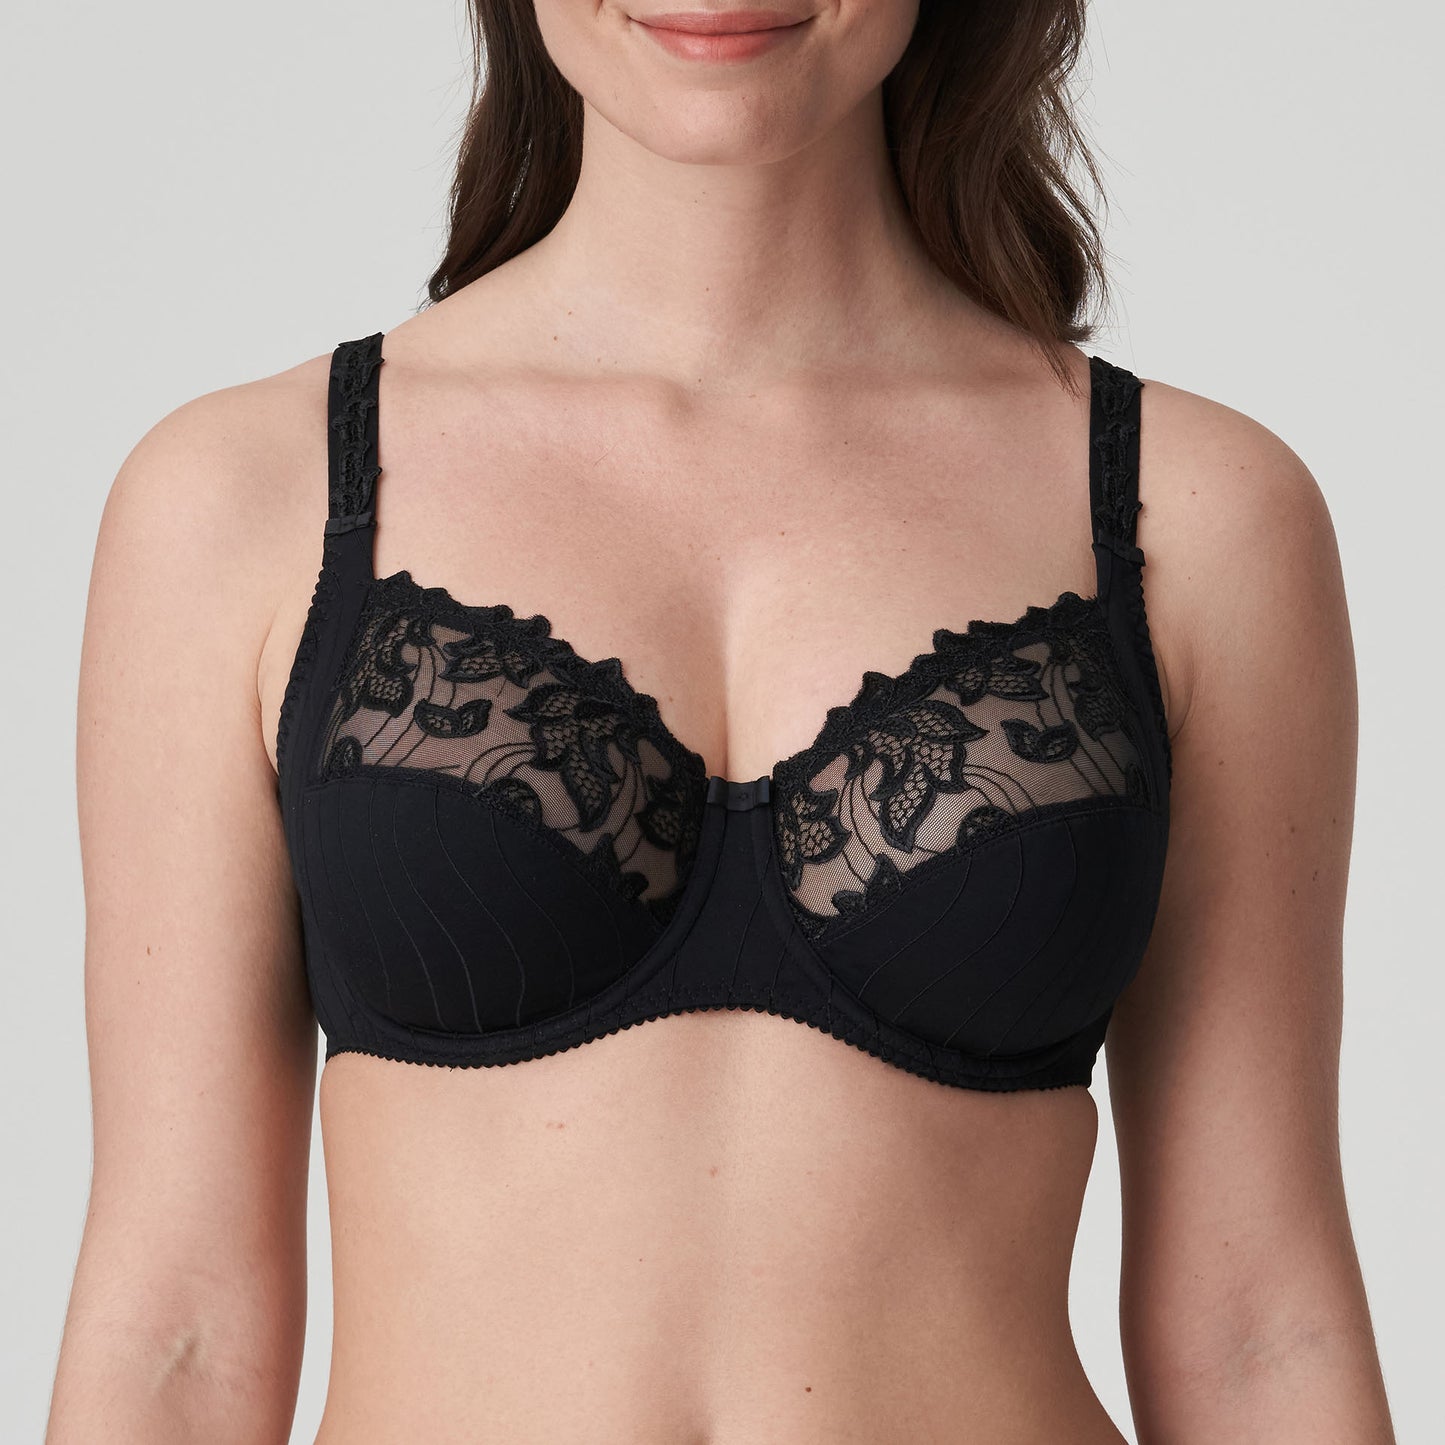 Woman wearing a supportive full cup underwire bra for large breasts in black by PrimaDanna.